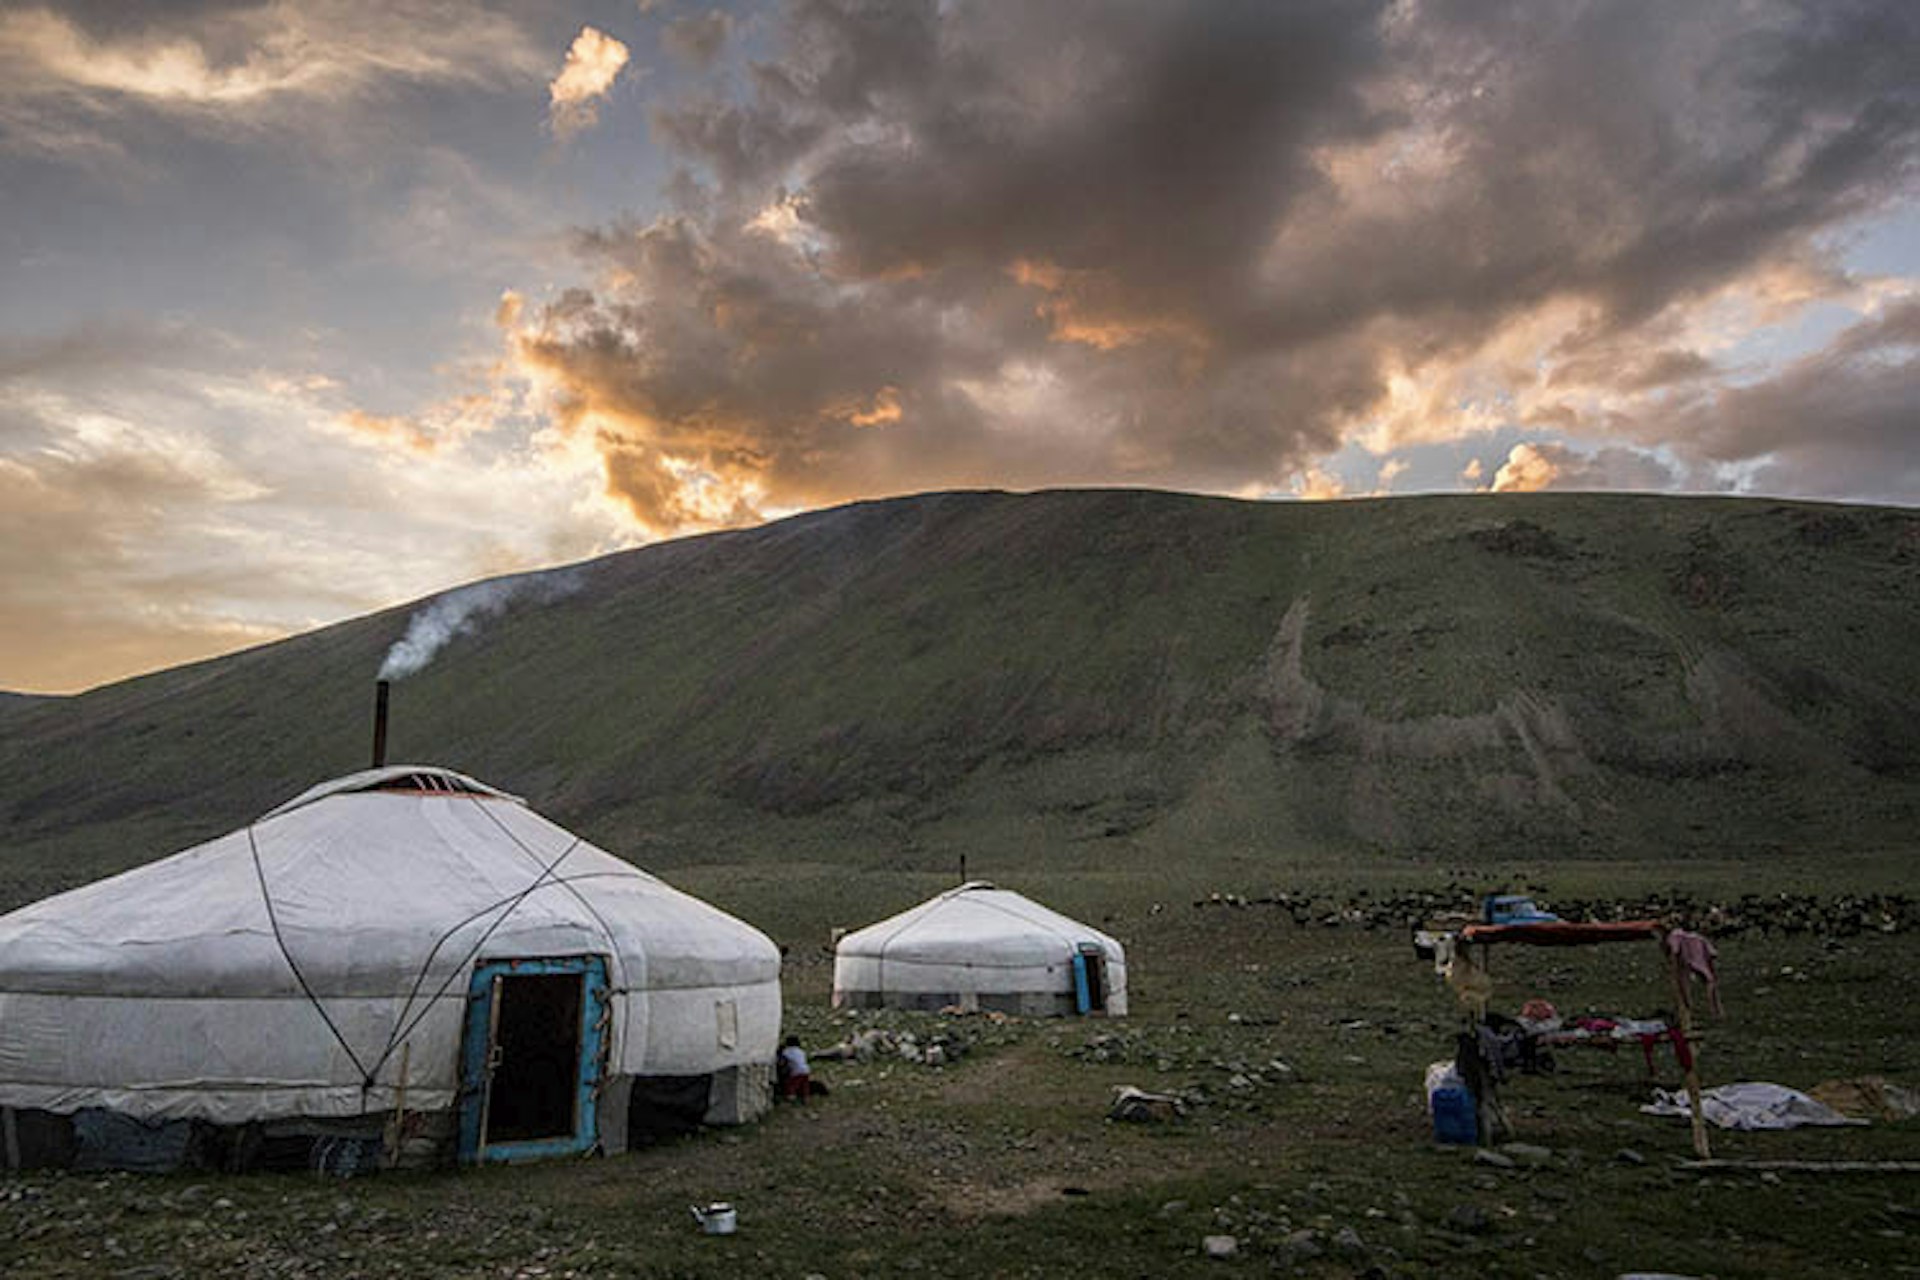 Eagle hunters' gers at dusk. Image by David Baxendale / Lonely Planet